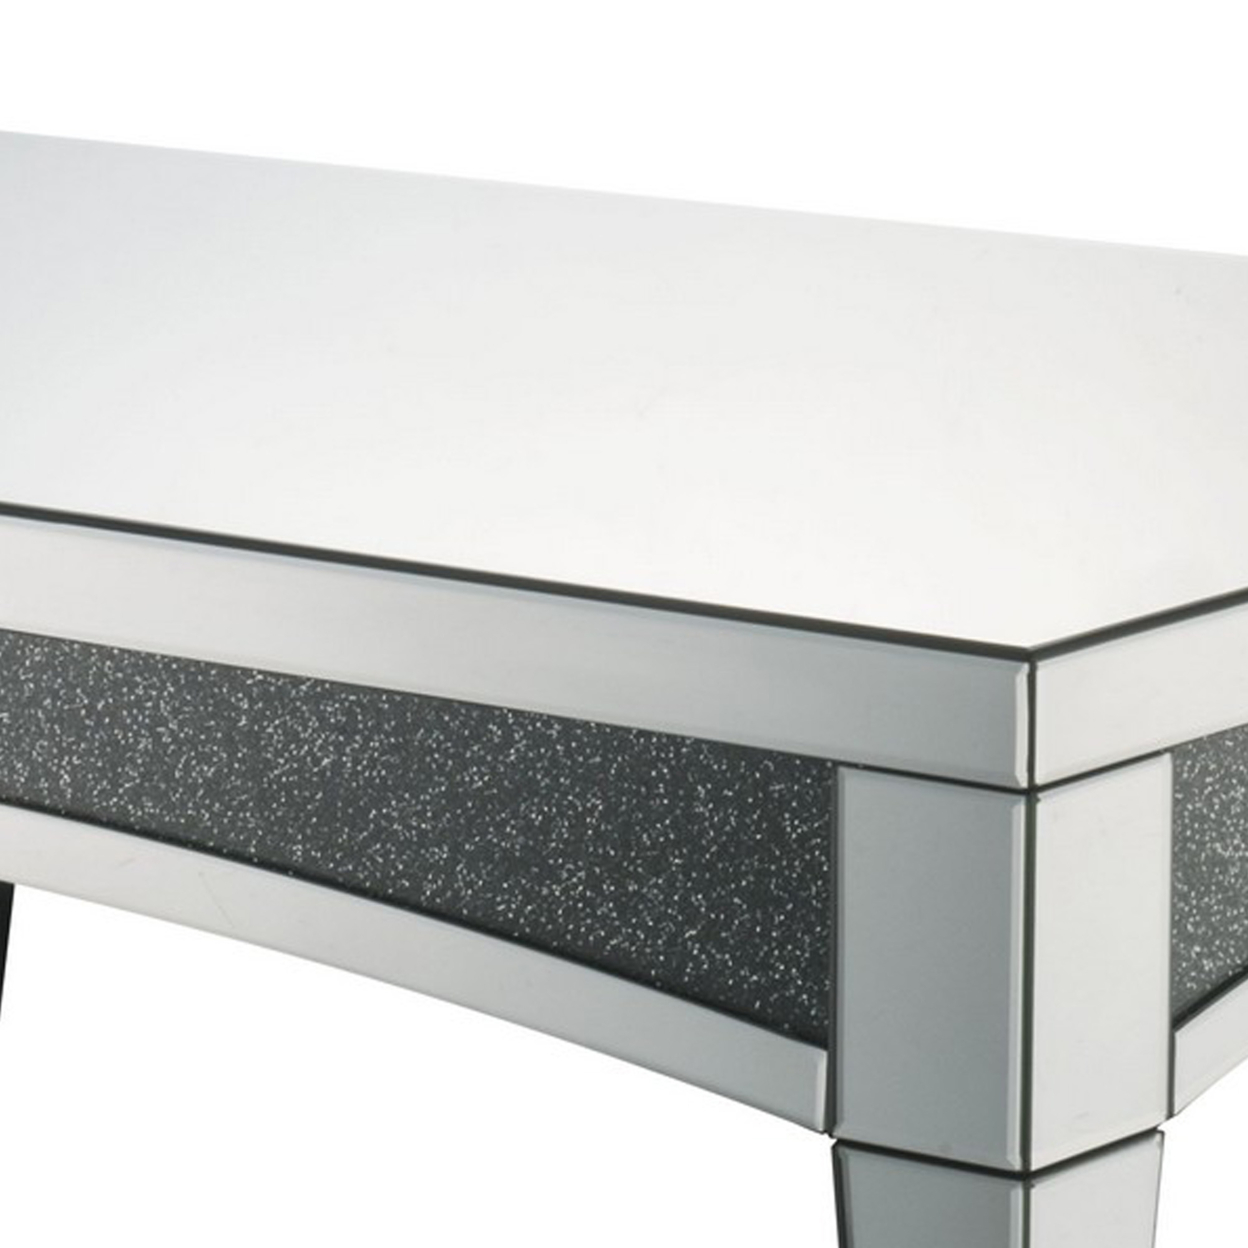 Coffee Table With Mirror Trim And Faux Stone Inlays, Silver- Saltoro Sherpi